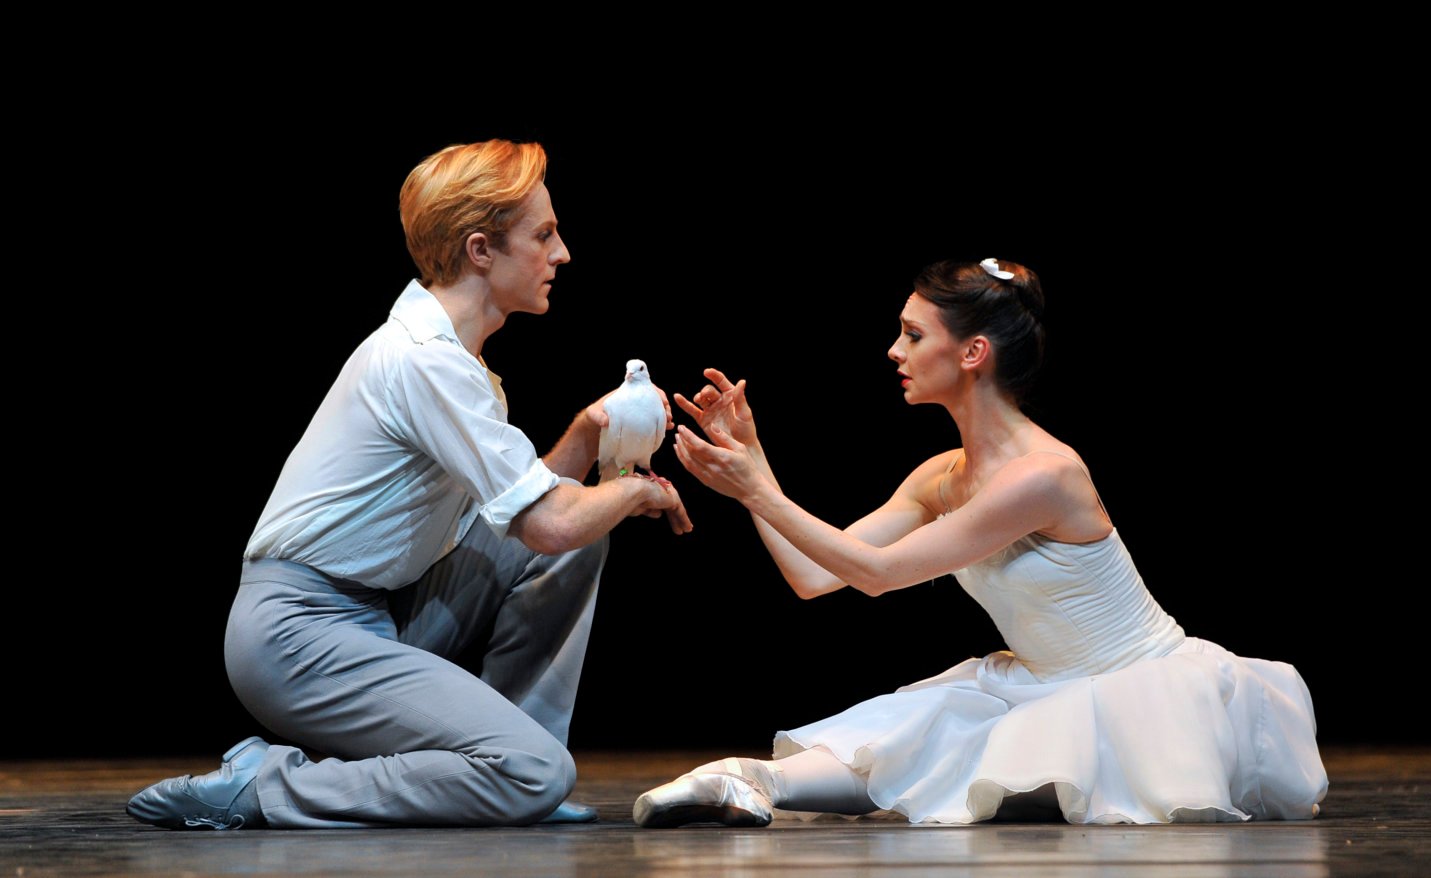 Royal Ballet's The Two Pigeons